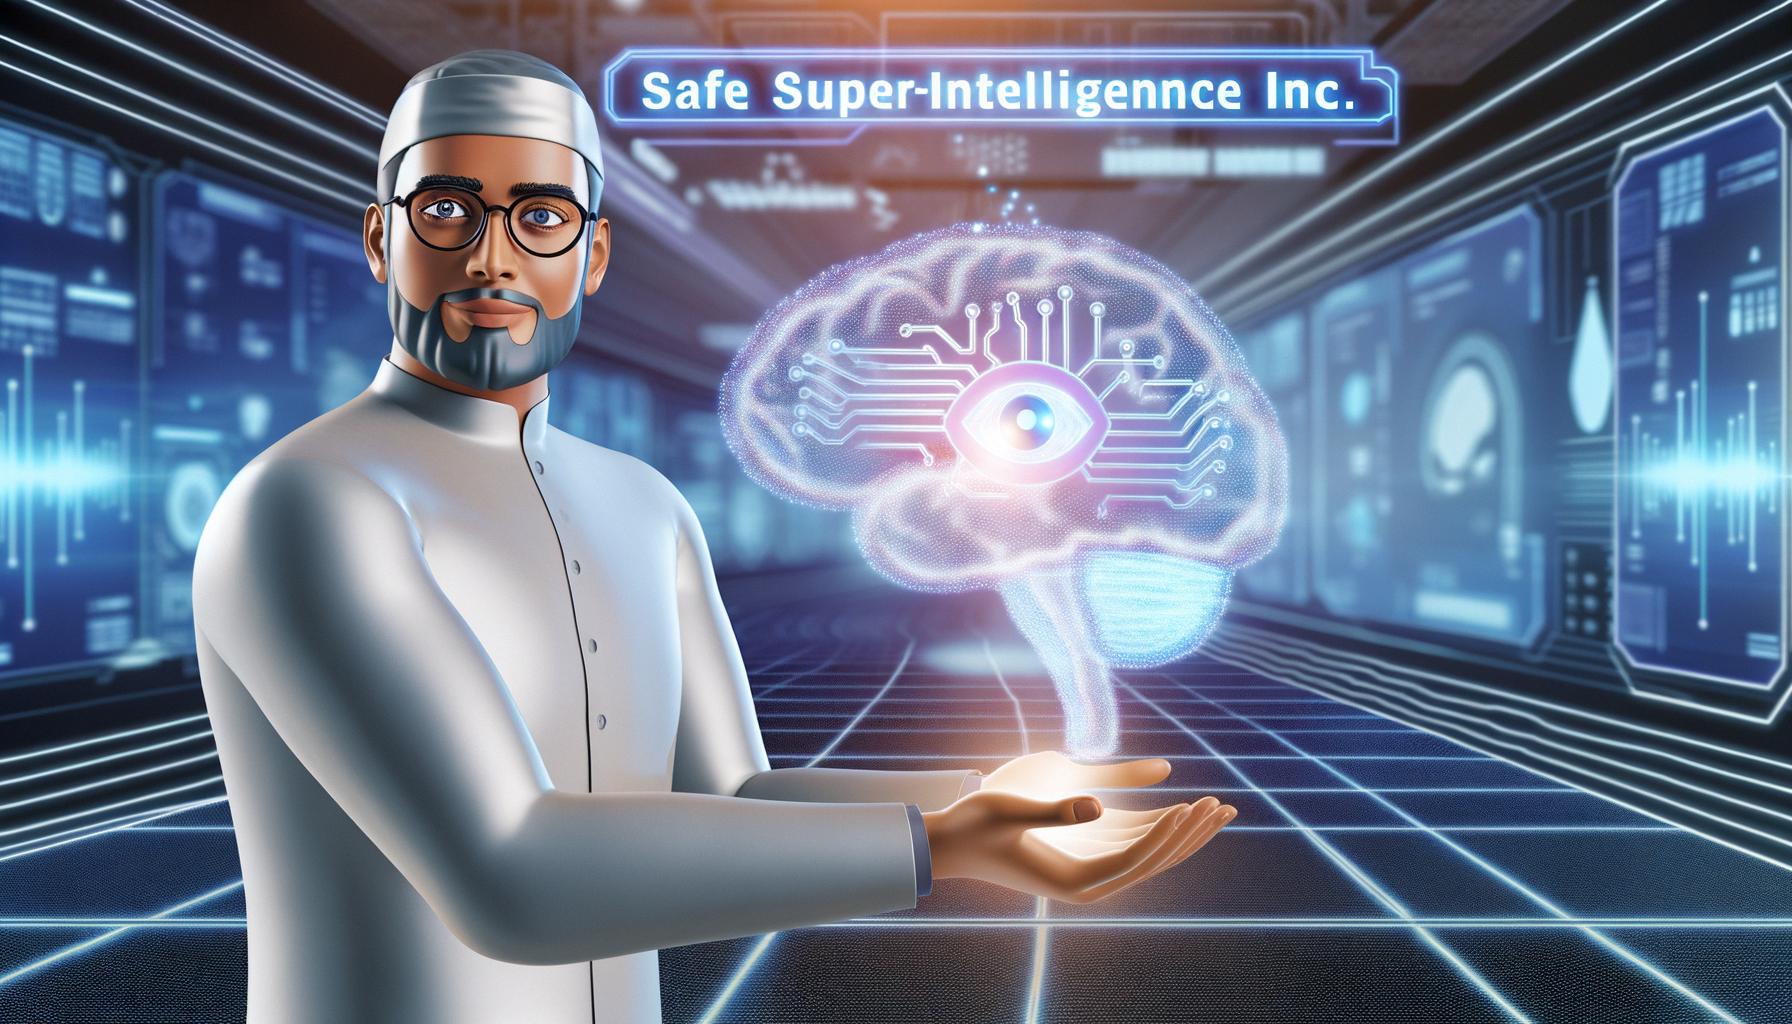 Ilya Sutskever launches SSI to prioritize AI safety without commercial pressures.